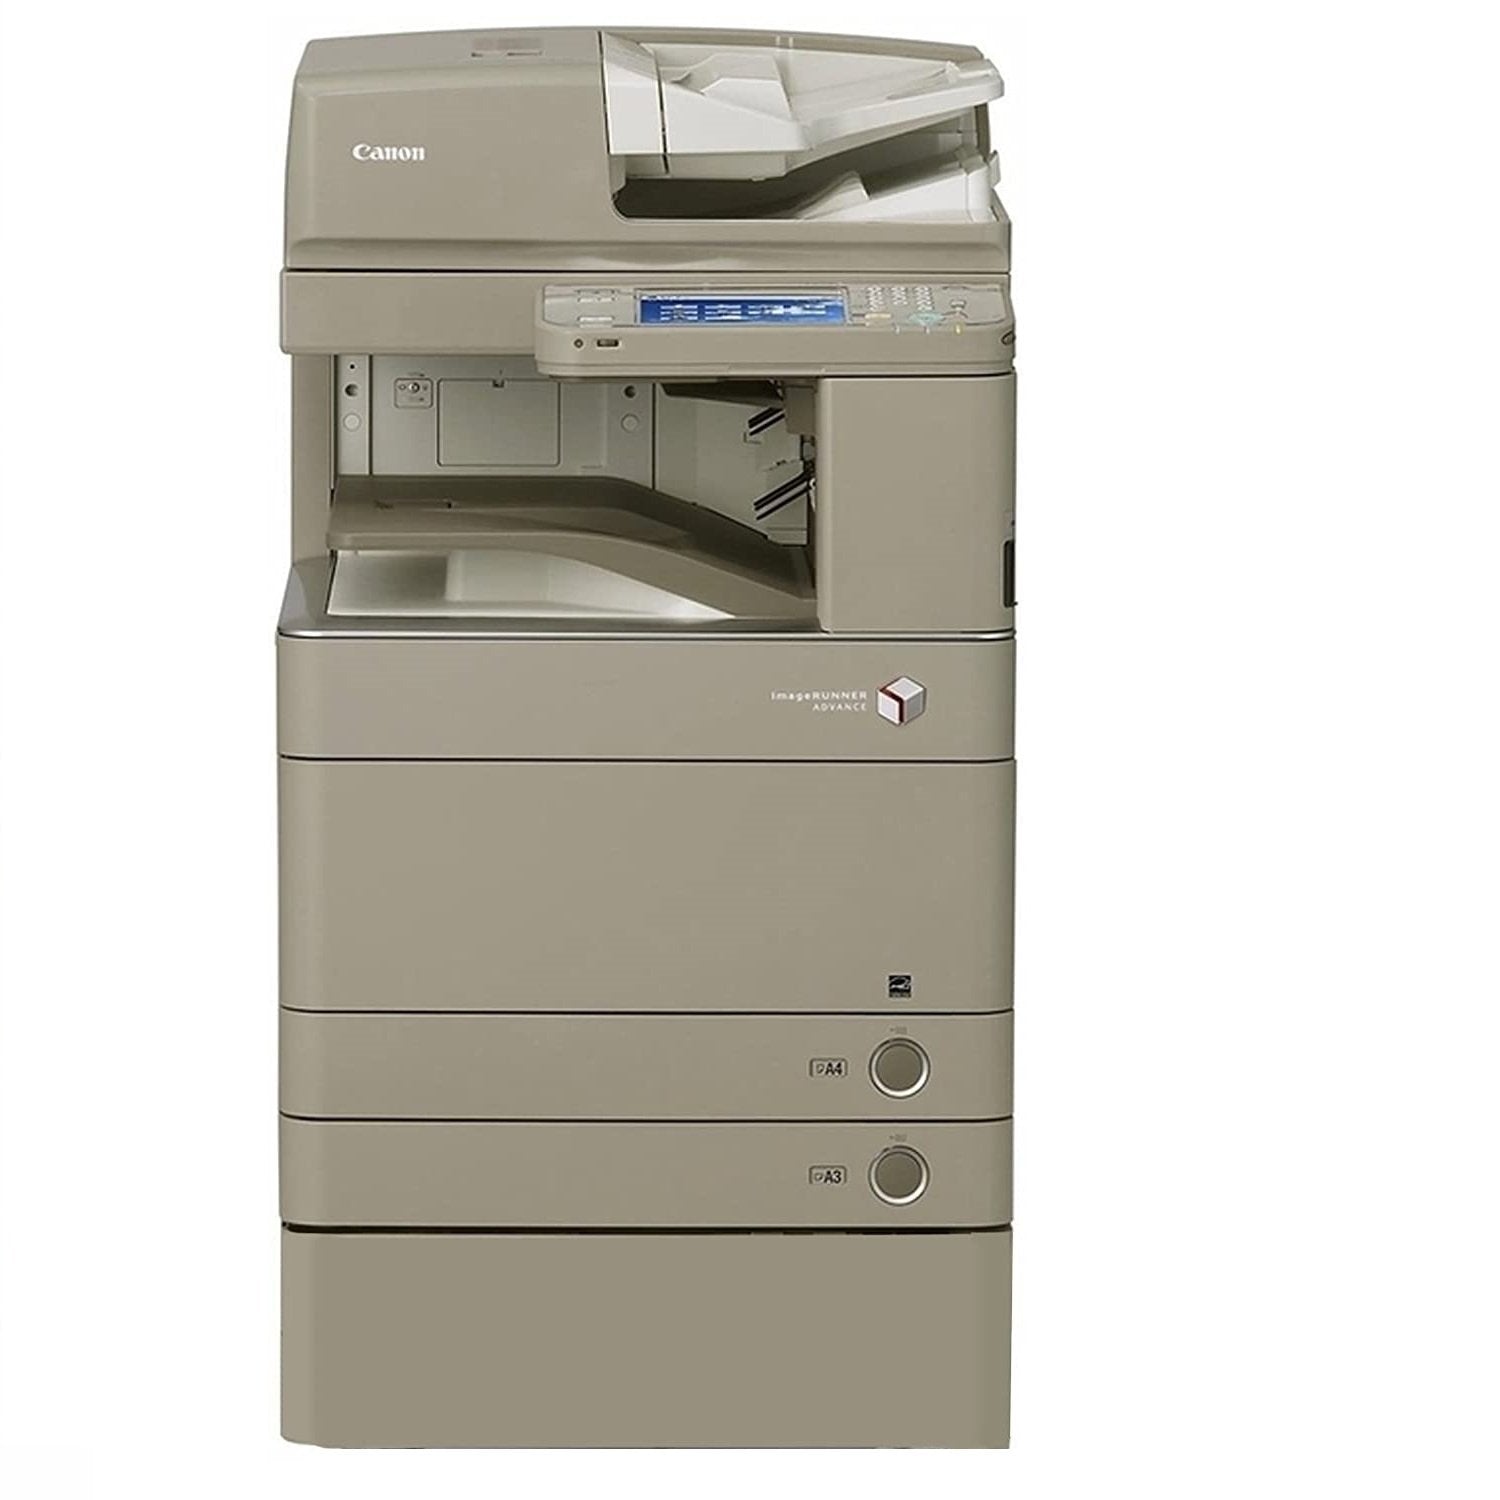 Absolute Toner Canon imageRUNNER ADVANCE C5250 Laser Color Multifunction Printer, Copier, Scanner, 12 x 18 For Office | IRAC5250 - $49/Month Showroom Color Copiers